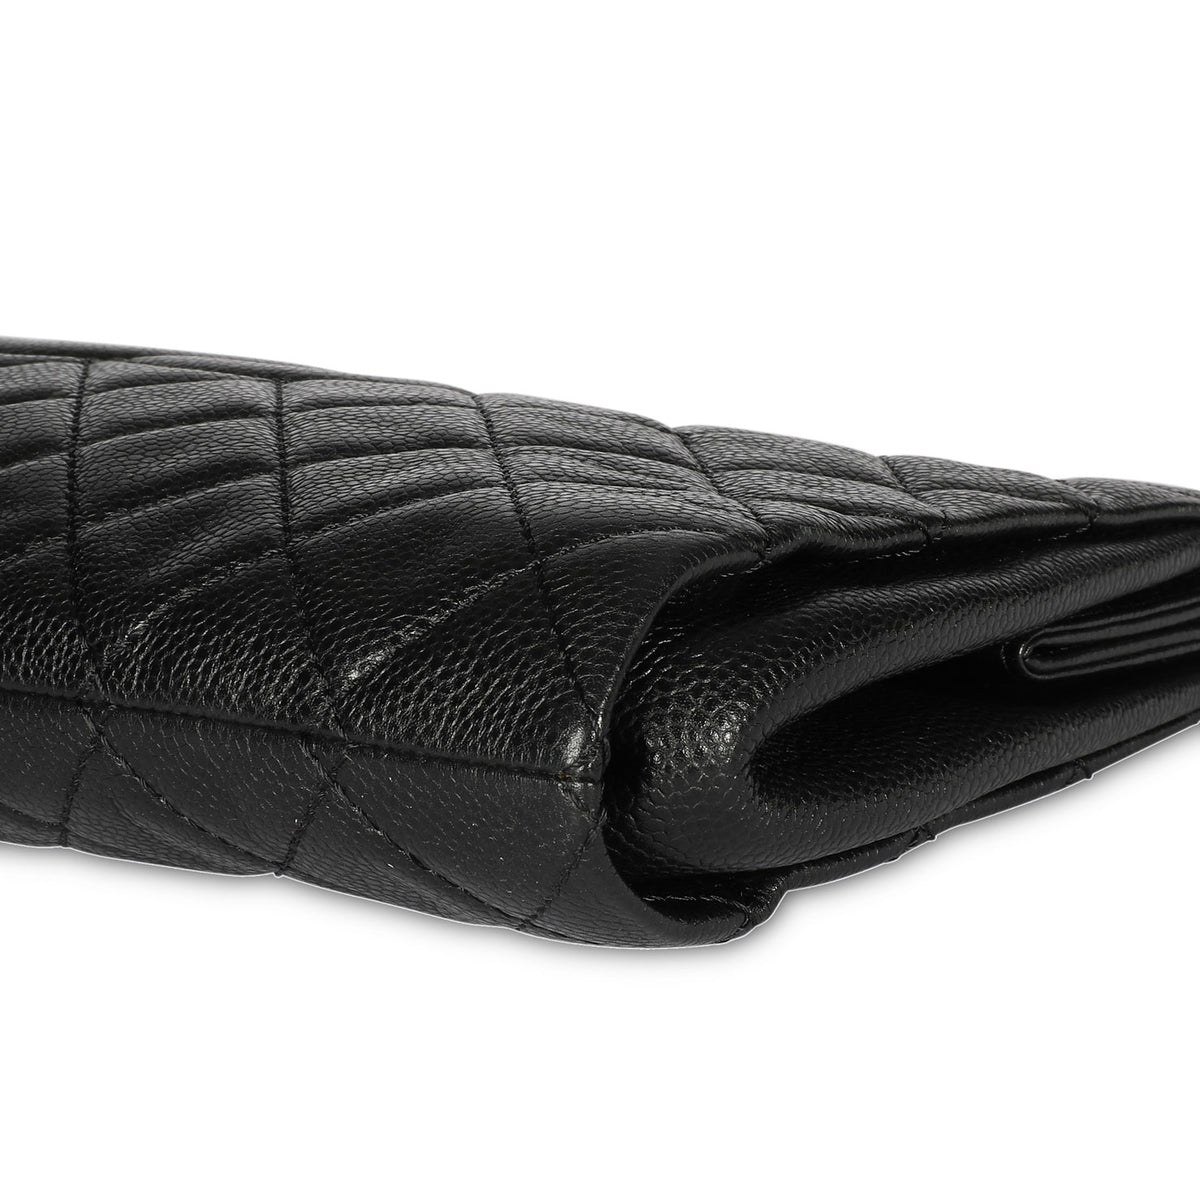 Chanel Black Caviar Quilted Timeless Frame Clutch